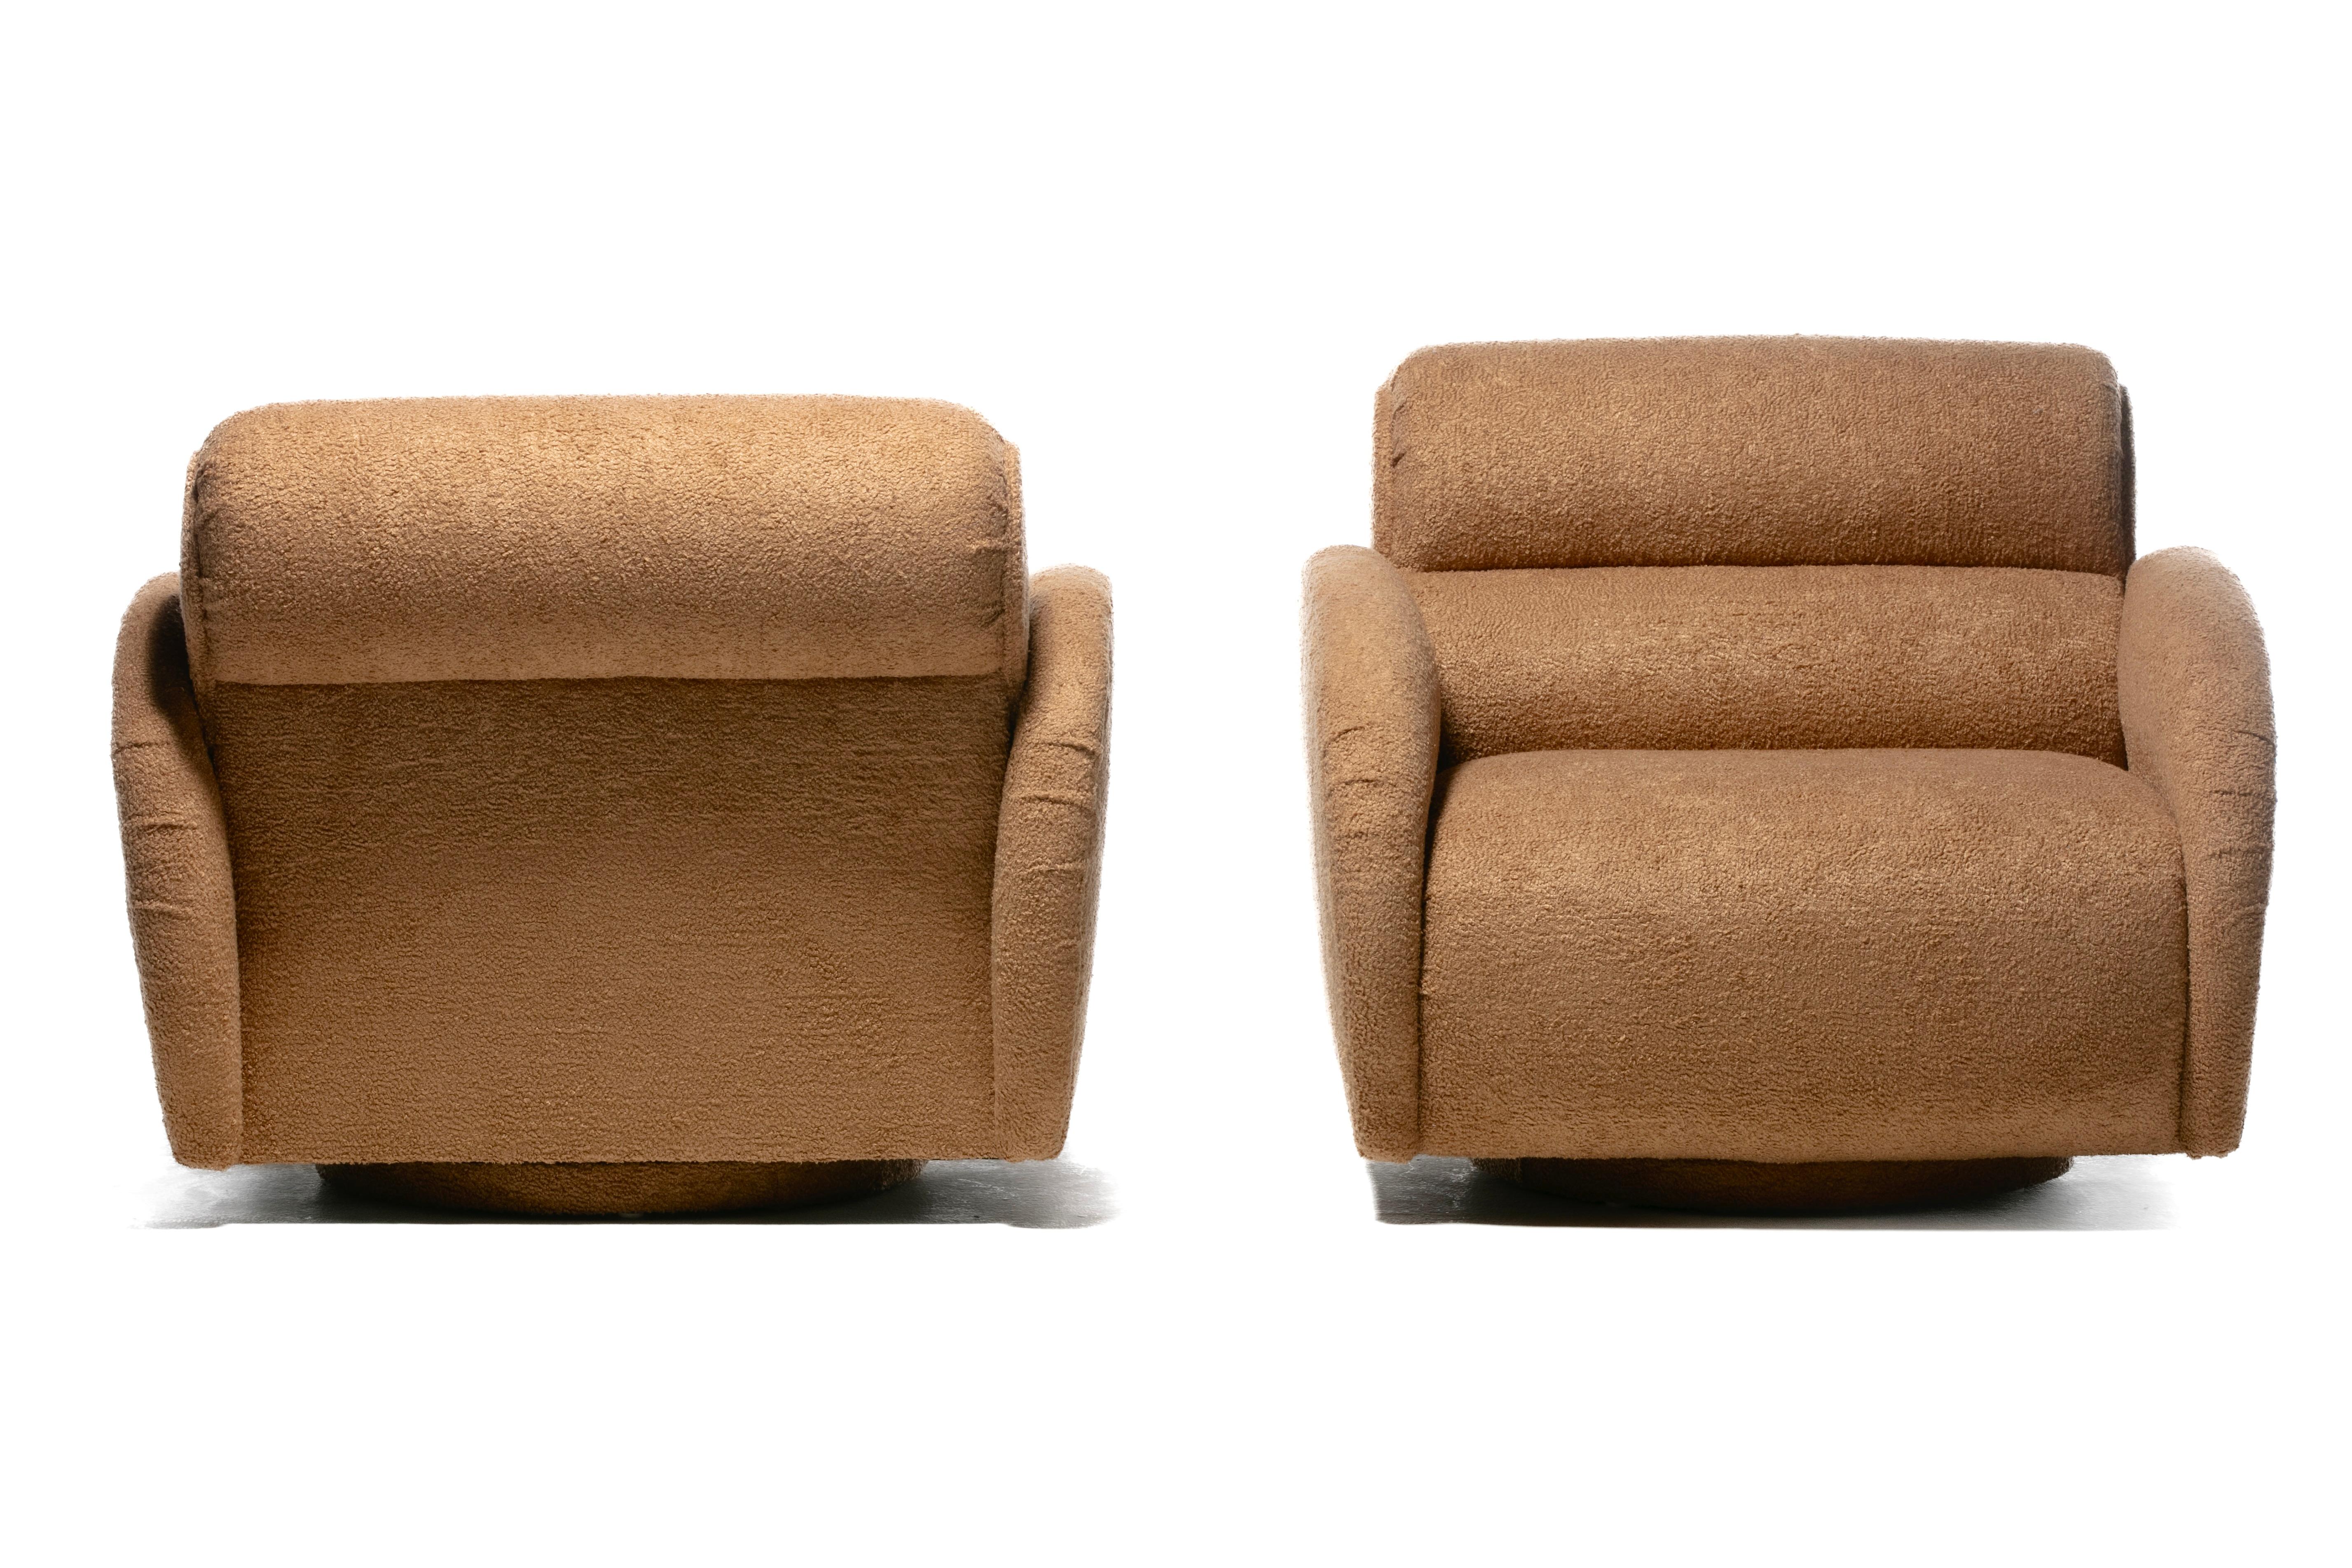 Large Scale Directional Post Modern Swivel Chairs & Ottoman in Mocha Fabric For Sale 2